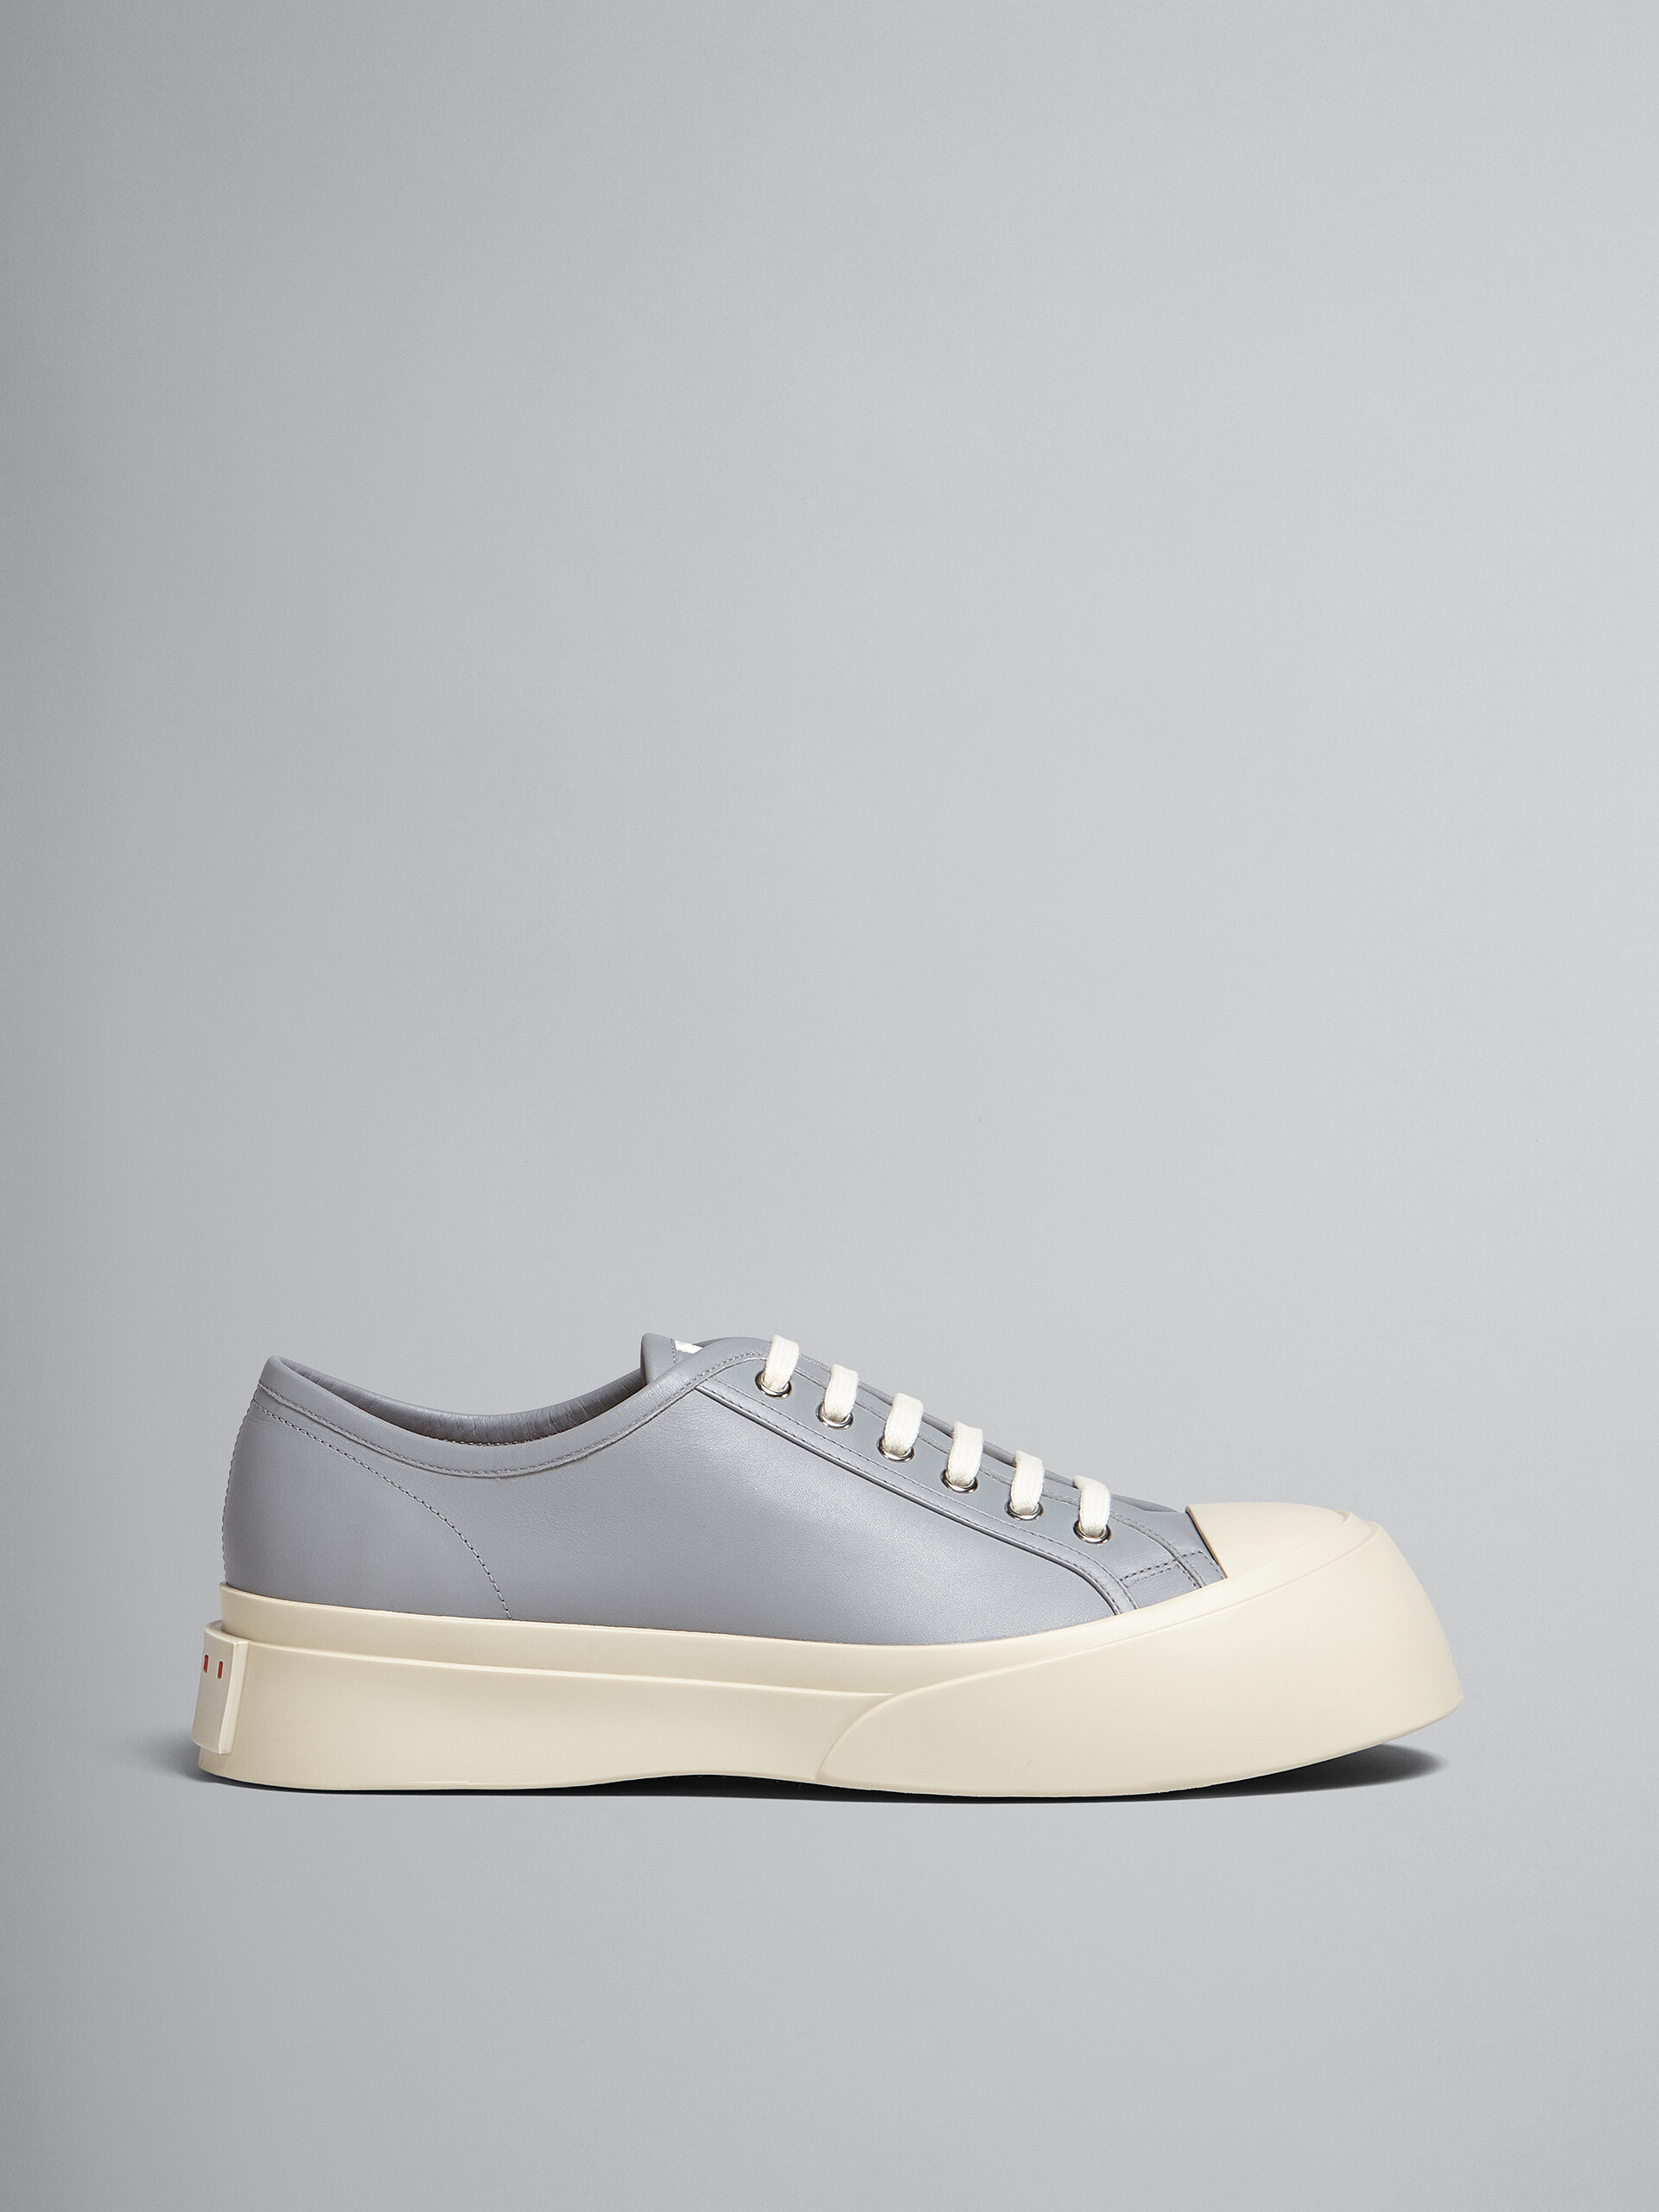 Grey nappa leather PABLO sneaker - Sneakers - Image 1